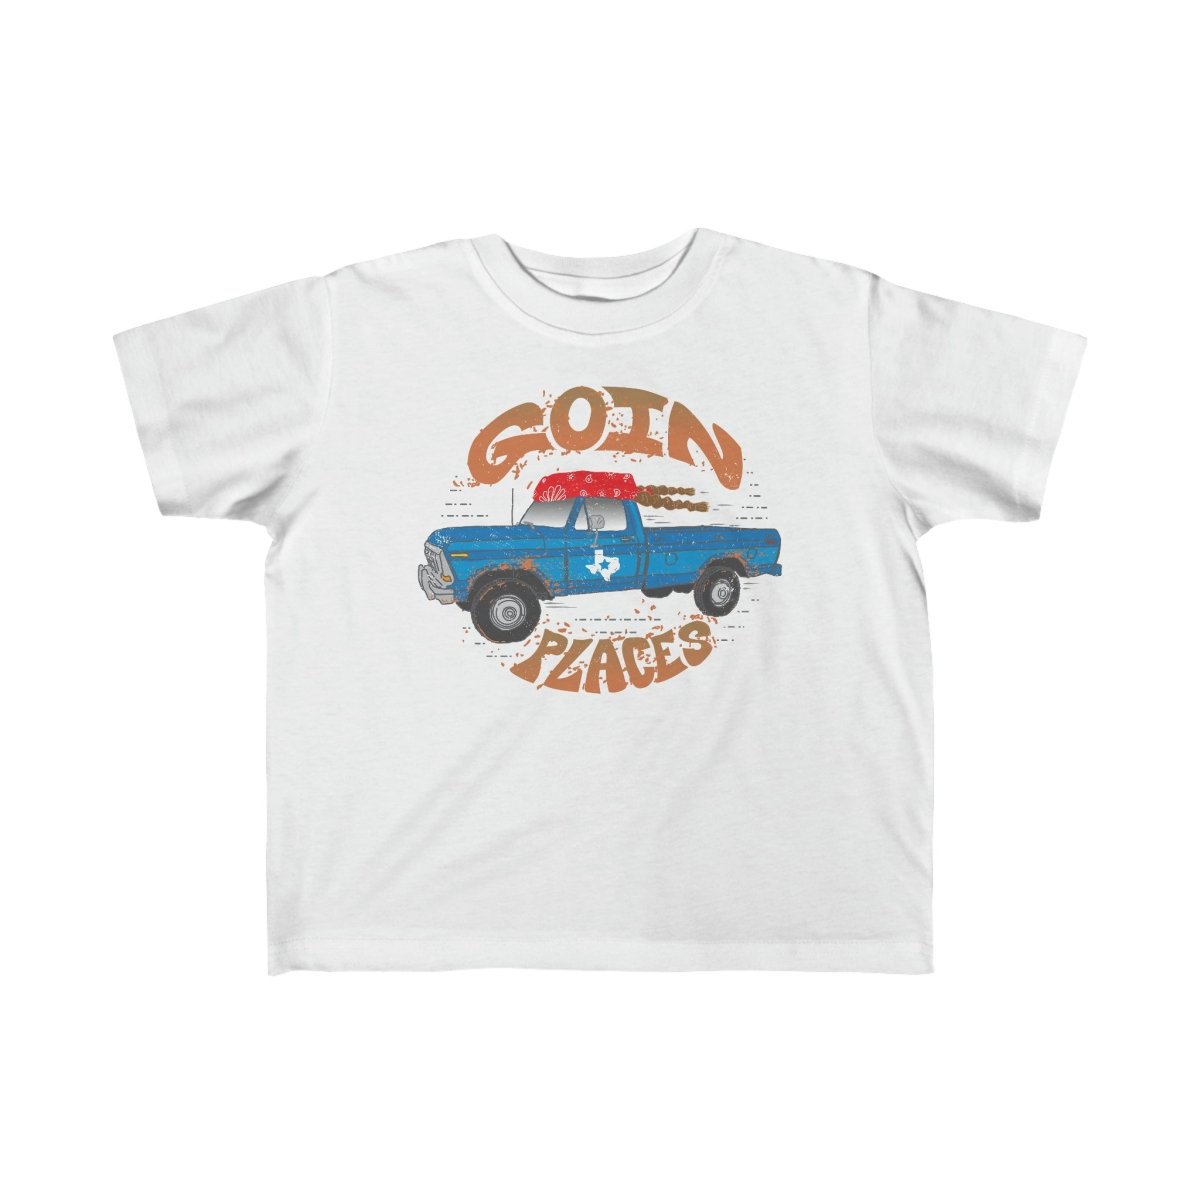 Goin Places Toddler T-Shirt, Family Travel Vacation, Road Gypsy